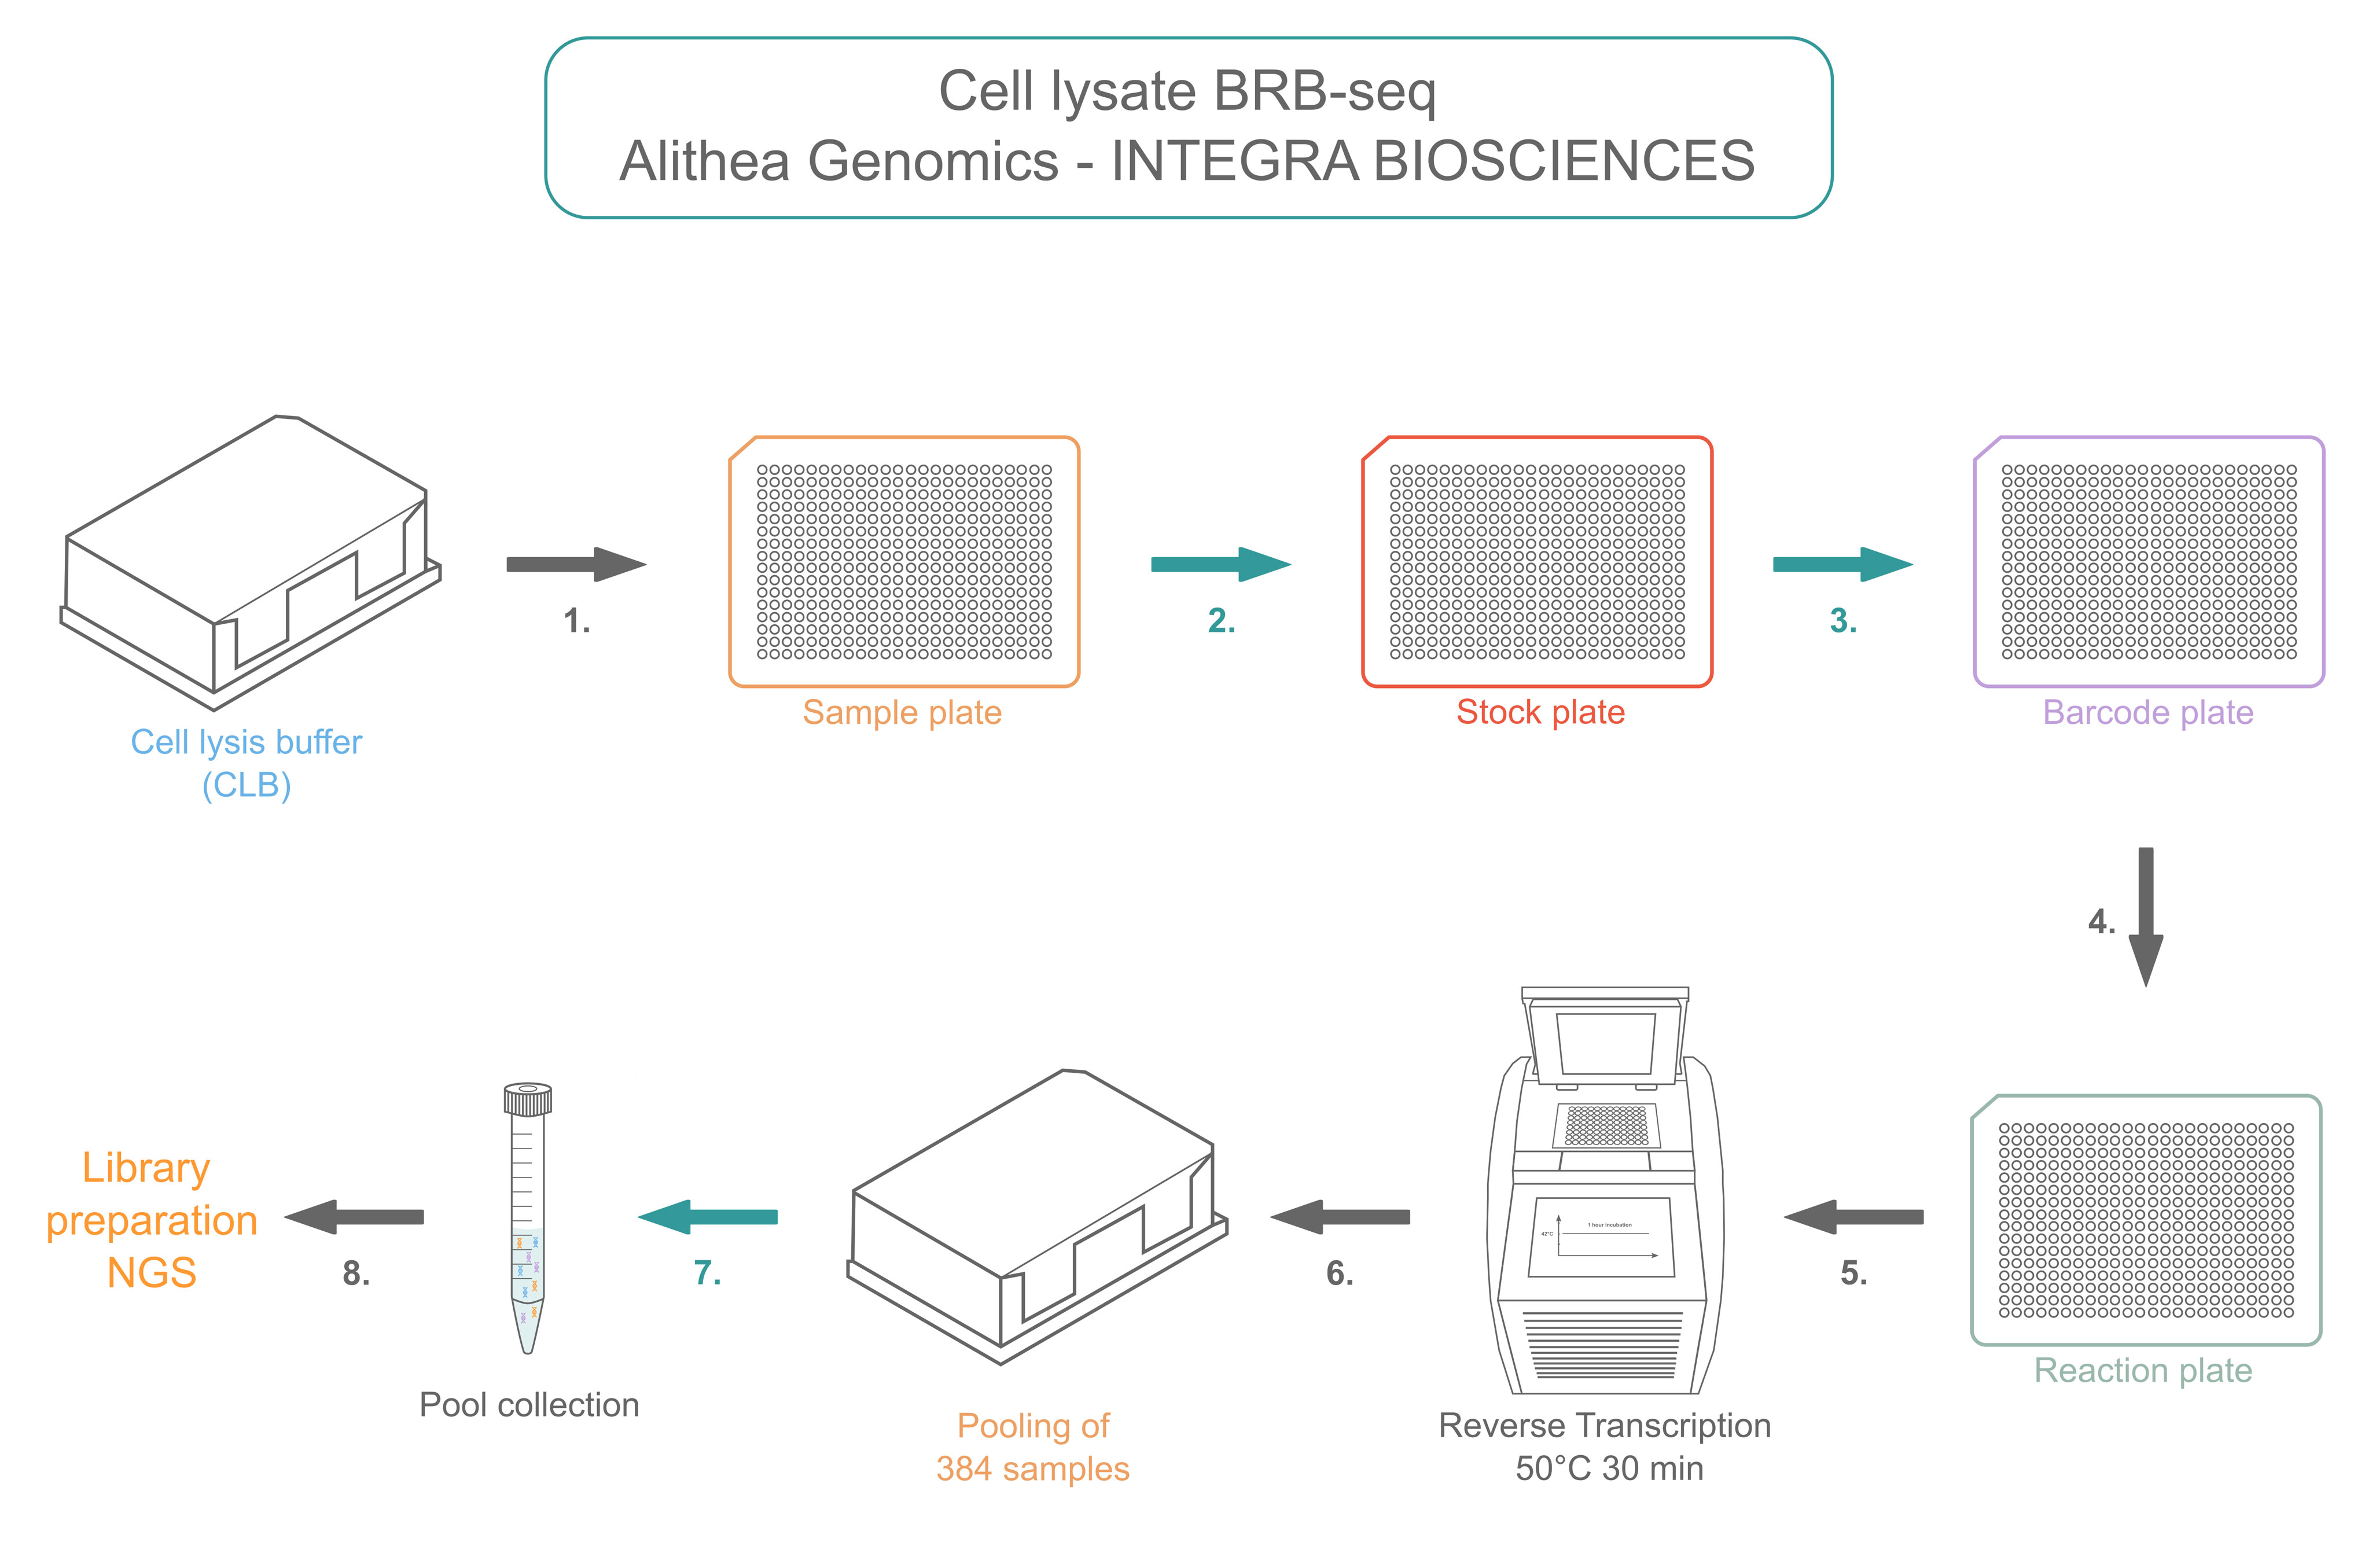 Sample preparation workflow for cell lysate BRB-seq with the help of the VIAFLO 384.